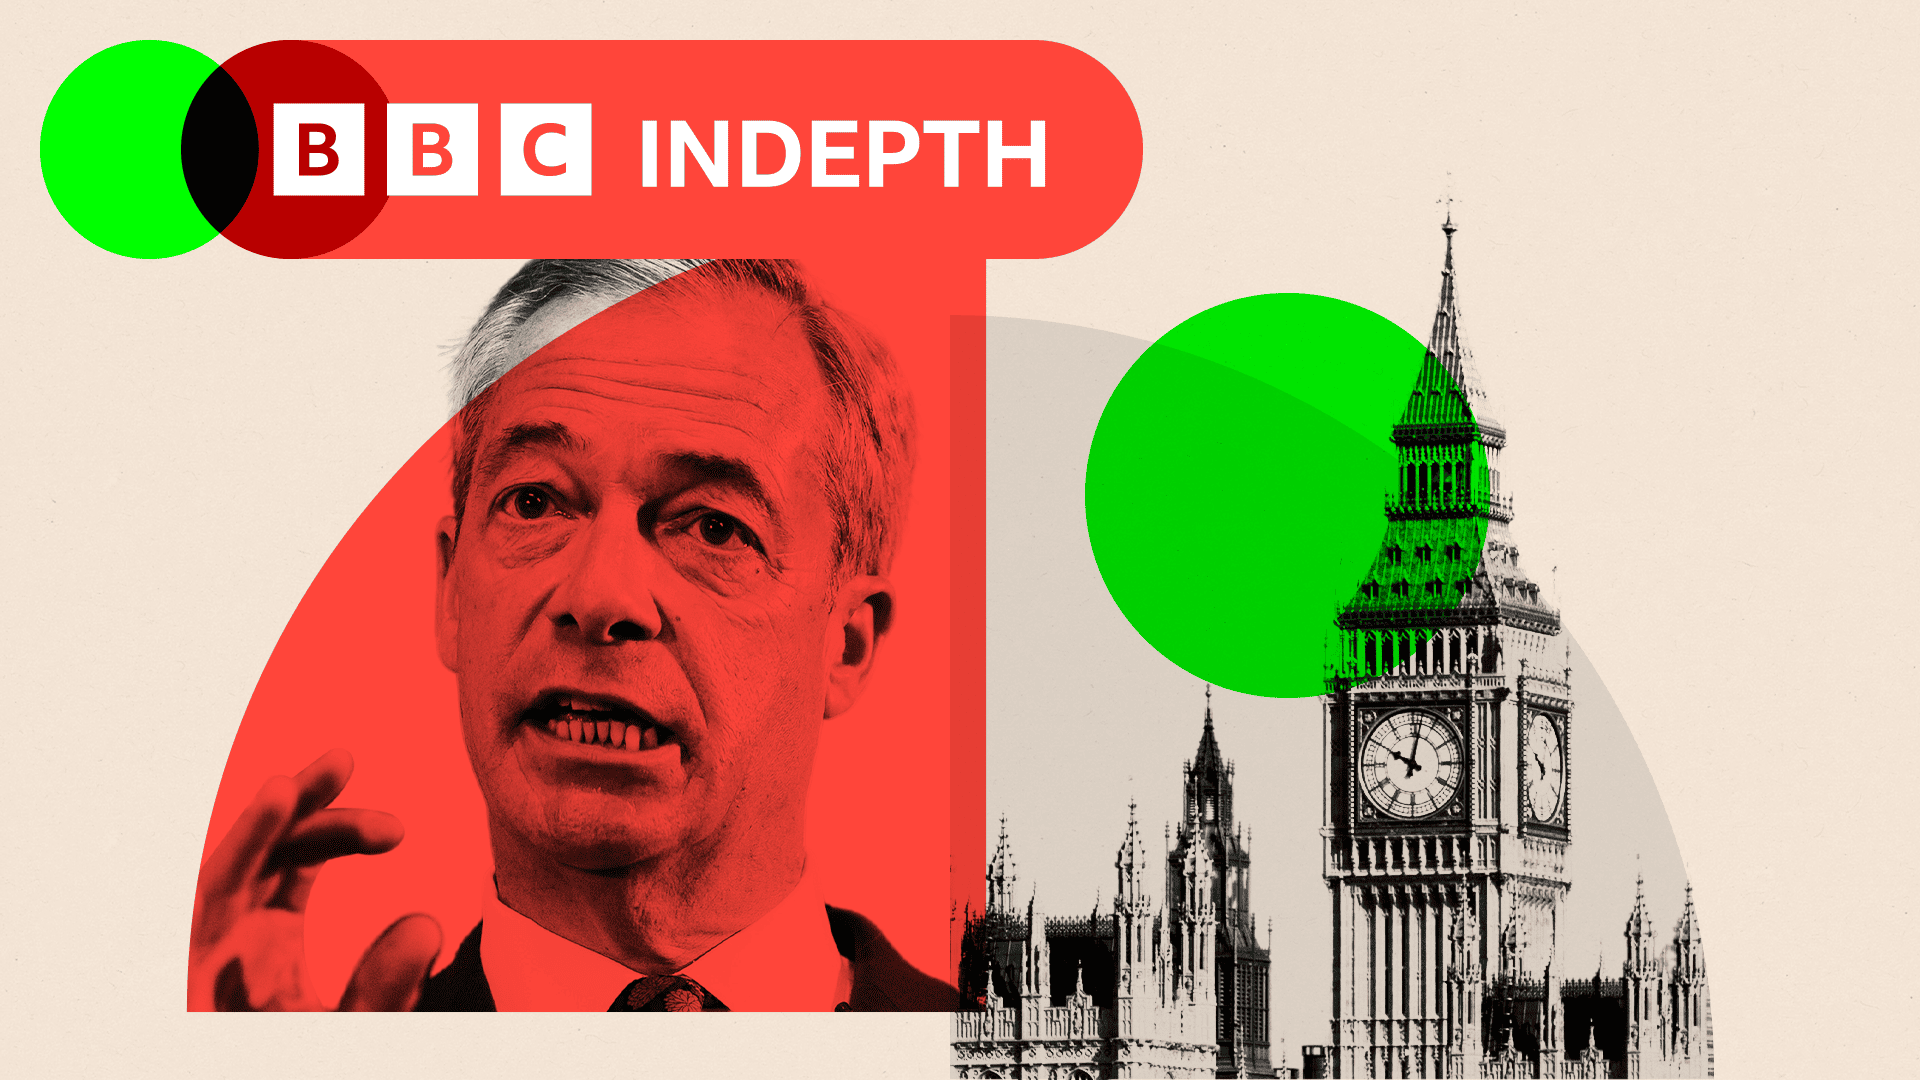 Nigel Farage’s return means turbulence for the Tories